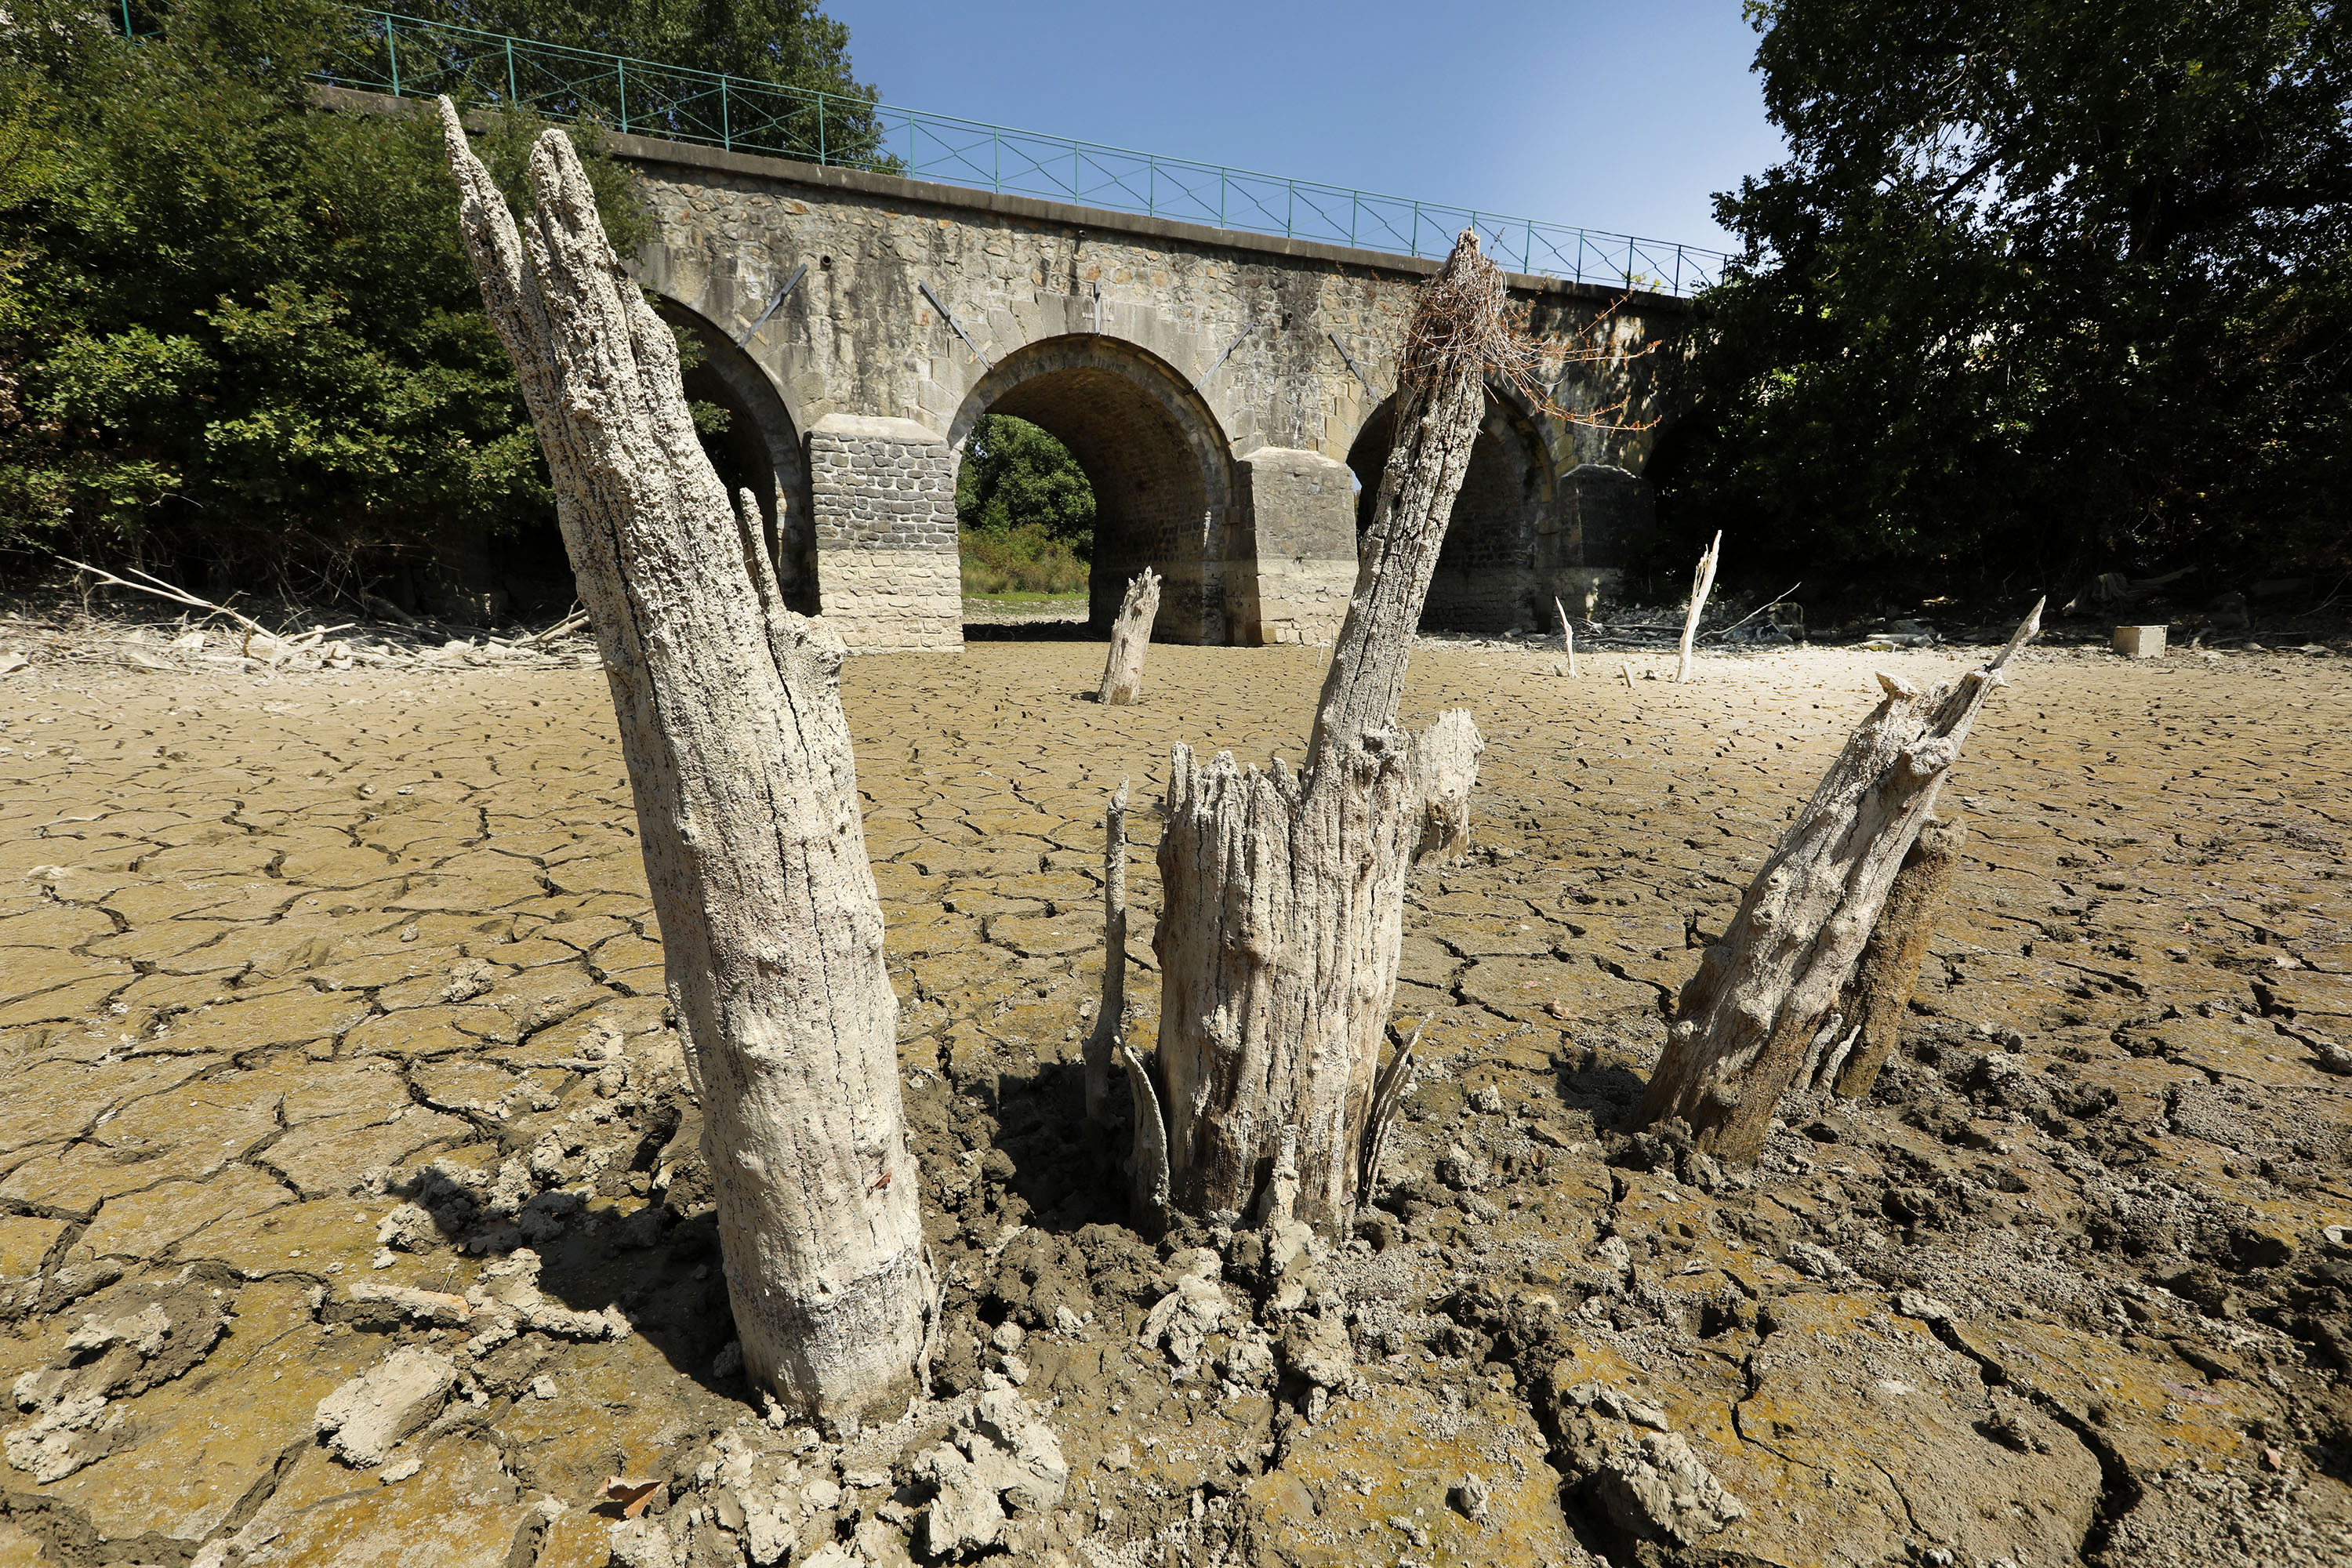 The Gardon River dries up during a drought on Aug. 13, 2022, in Anduze, France. (Patrick Aventurier/Getty Images)